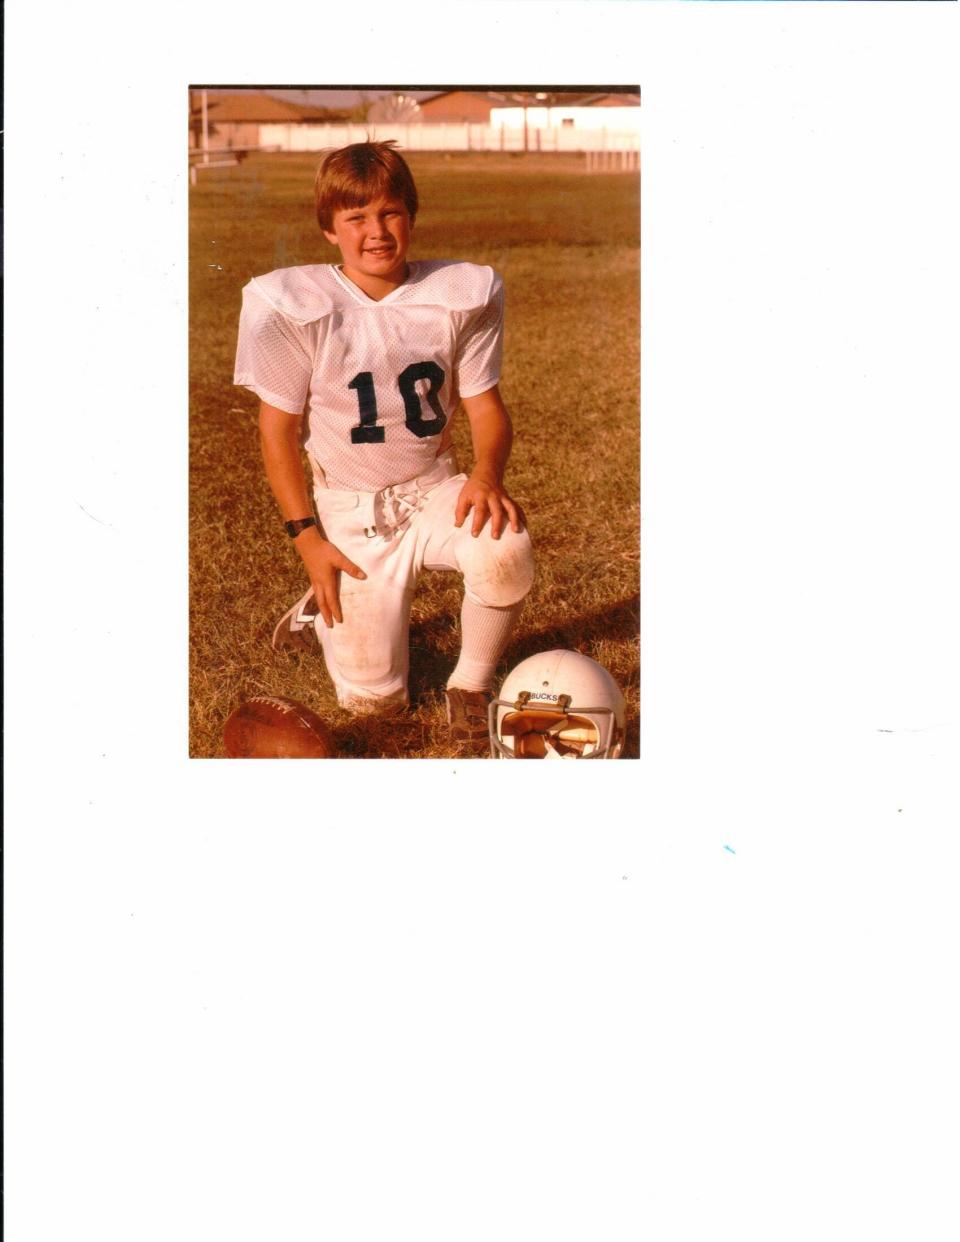 Zach Thomas during his youth football days growing up in White Deer.